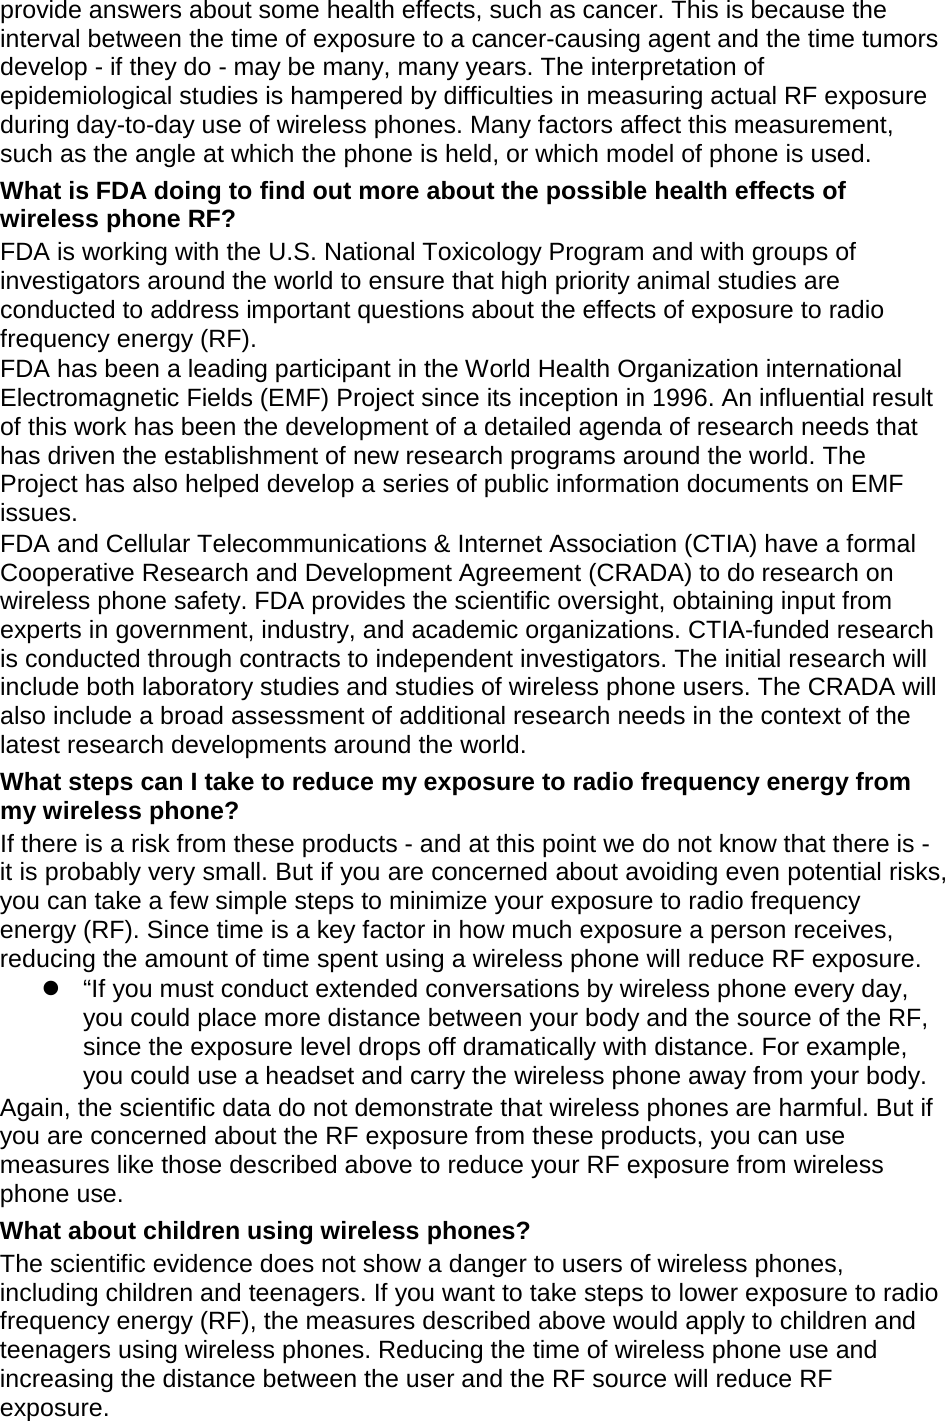 provide answers about some health effects, such as cancer. This is because the interval between the time of exposure to a cancer-causing agent and the time tumors develop - if they do - may be many, many years. The interpretation of epidemiological studies is hampered by difficulties in measuring actual RF exposure during day-to-day use of wireless phones. Many factors affect this measurement, such as the angle at which the phone is held, or which model of phone is used. What is FDA doing to find out more about the possible health effects of wireless phone RF? FDA is working with the U.S. National Toxicology Program and with groups of investigators around the world to ensure that high priority animal studies are conducted to address important questions about the effects of exposure to radio frequency energy (RF). FDA has been a leading participant in the World Health Organization international Electromagnetic Fields (EMF) Project since its inception in 1996. An influential result of this work has been the development of a detailed agenda of research needs that has driven the establishment of new research programs around the world. The Project has also helped develop a series of public information documents on EMF issues. FDA and Cellular Telecommunications &amp; Internet Association (CTIA) have a formal Cooperative Research and Development Agreement (CRADA) to do research on wireless phone safety. FDA provides the scientific oversight, obtaining input from experts in government, industry, and academic organizations. CTIA-funded research is conducted through contracts to independent investigators. The initial research will include both laboratory studies and studies of wireless phone users. The CRADA will also include a broad assessment of additional research needs in the context of the latest research developments around the world. What steps can I take to reduce my exposure to radio frequency energy from my wireless phone? If there is a risk from these products - and at this point we do not know that there is - it is probably very small. But if you are concerned about avoiding even potential risks, you can take a few simple steps to minimize your exposure to radio frequency energy (RF). Since time is a key factor in how much exposure a person receives, reducing the amount of time spent using a wireless phone will reduce RF exposure.  “If you must conduct extended conversations by wireless phone every day, you could place more distance between your body and the source of the RF, since the exposure level drops off dramatically with distance. For example, you could use a headset and carry the wireless phone away from your body. Again, the scientific data do not demonstrate that wireless phones are harmful. But if you are concerned about the RF exposure from these products, you can use measures like those described above to reduce your RF exposure from wireless phone use. What about children using wireless phones? The scientific evidence does not show a danger to users of wireless phones, including children and teenagers. If you want to take steps to lower exposure to radio frequency energy (RF), the measures described above would apply to children and teenagers using wireless phones. Reducing the time of wireless phone use and increasing the distance between the user and the RF source will reduce RF exposure. 